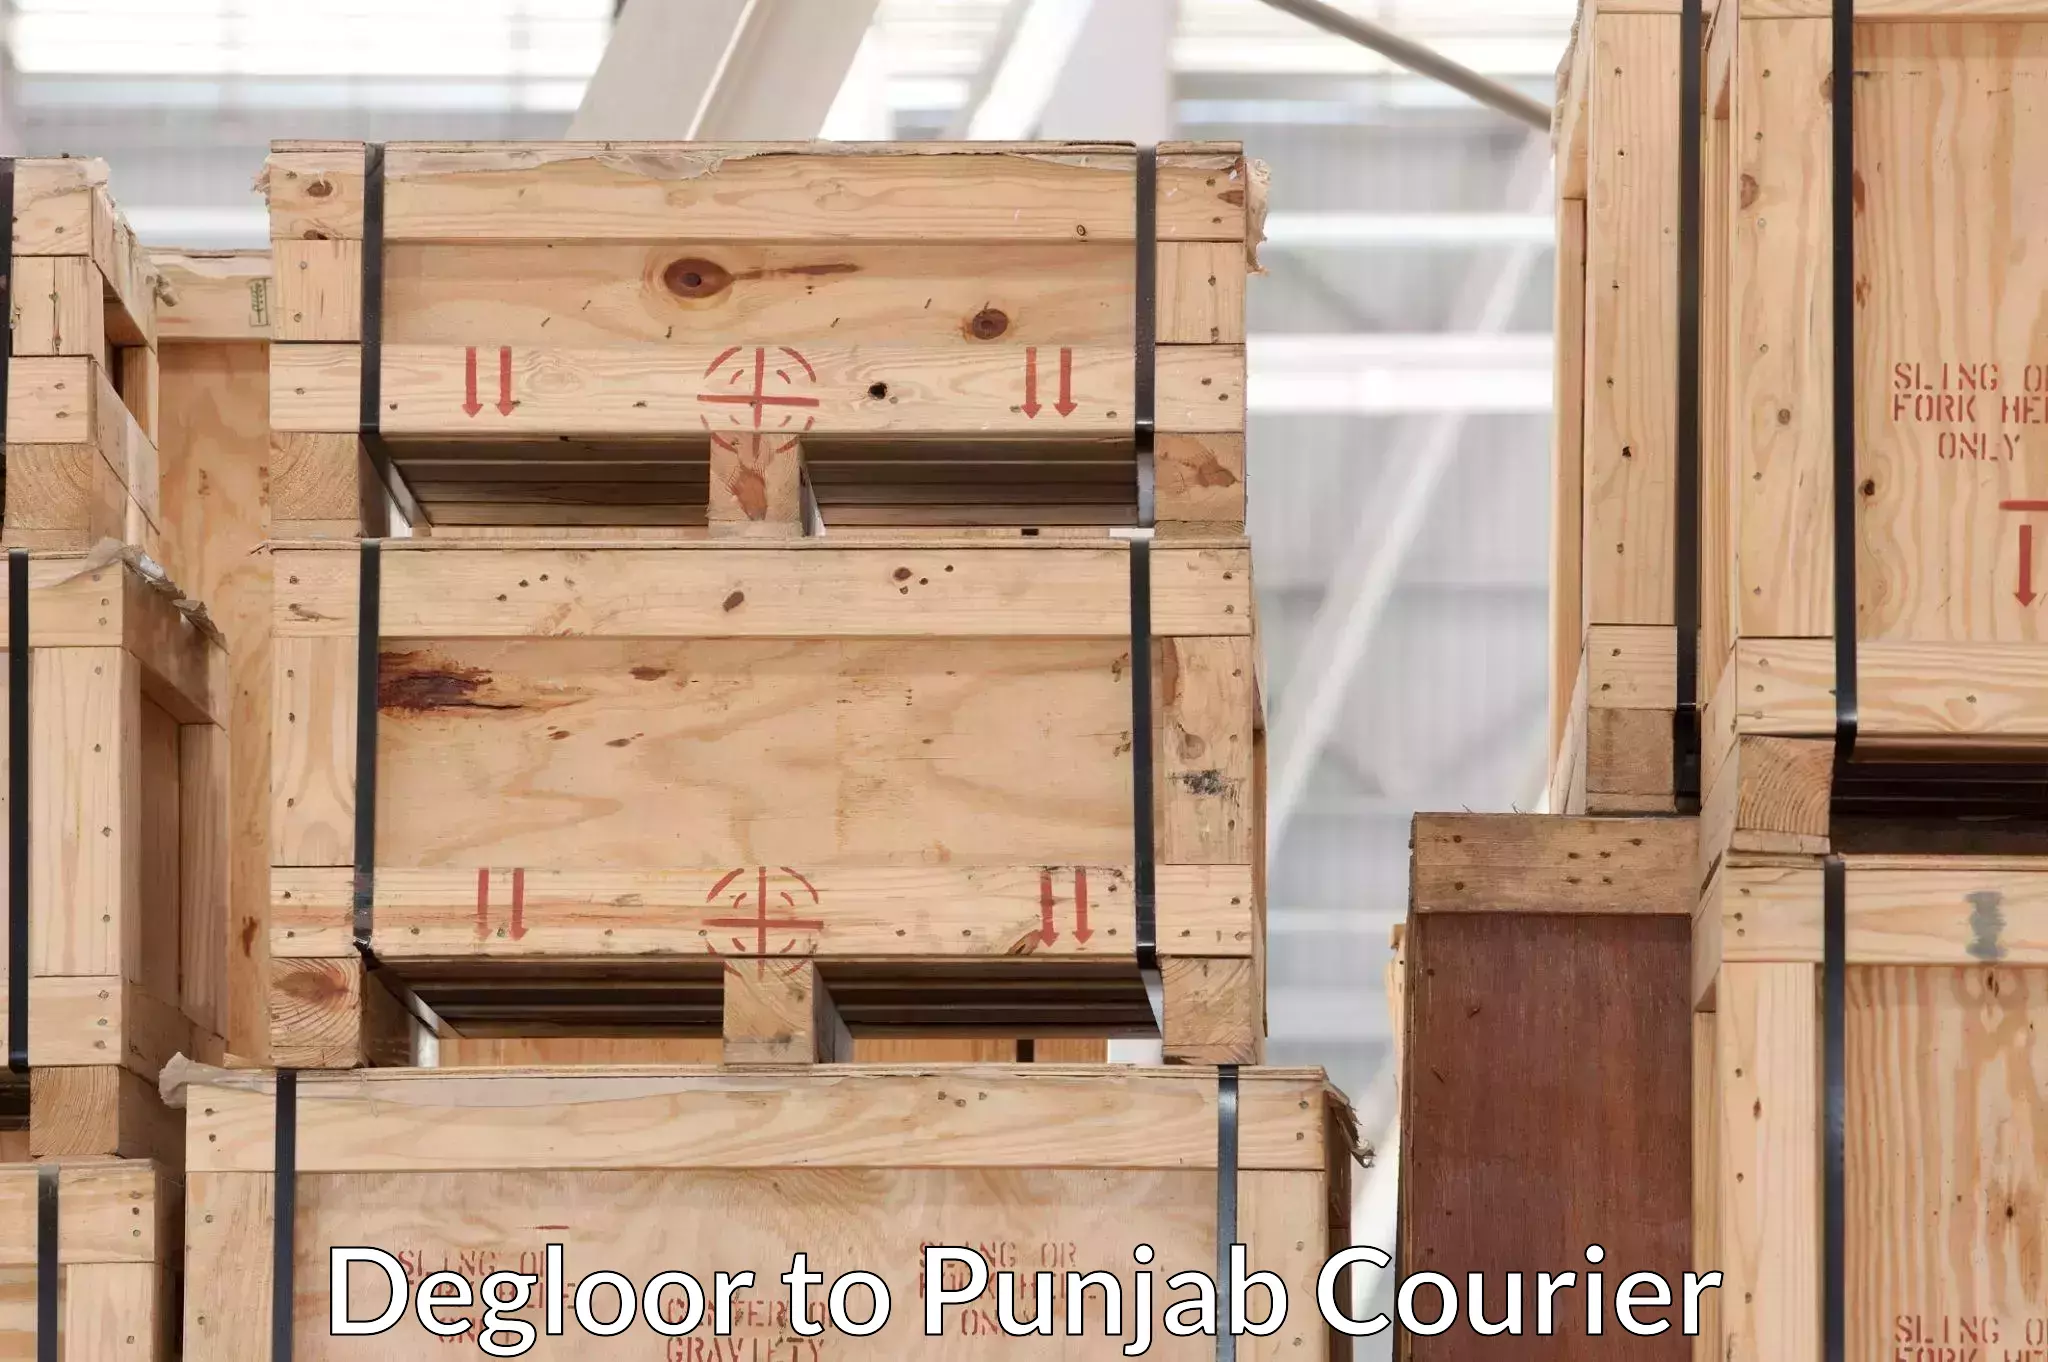 Residential moving experts Degloor to Punjab